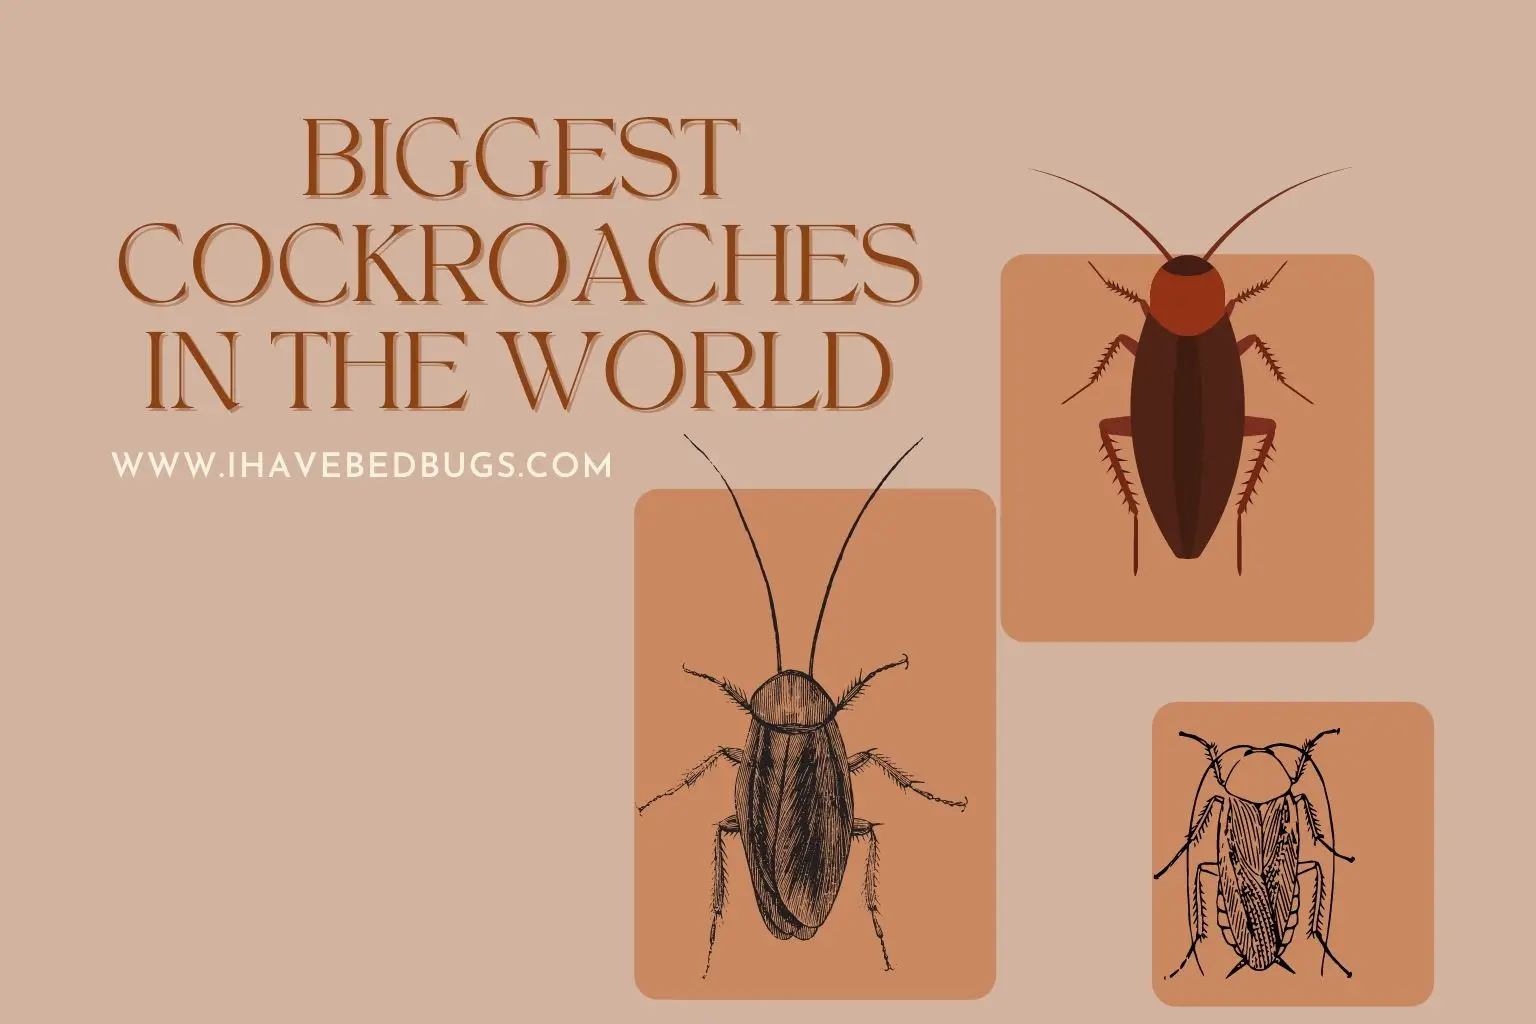 Biggest Cockroaches in the World